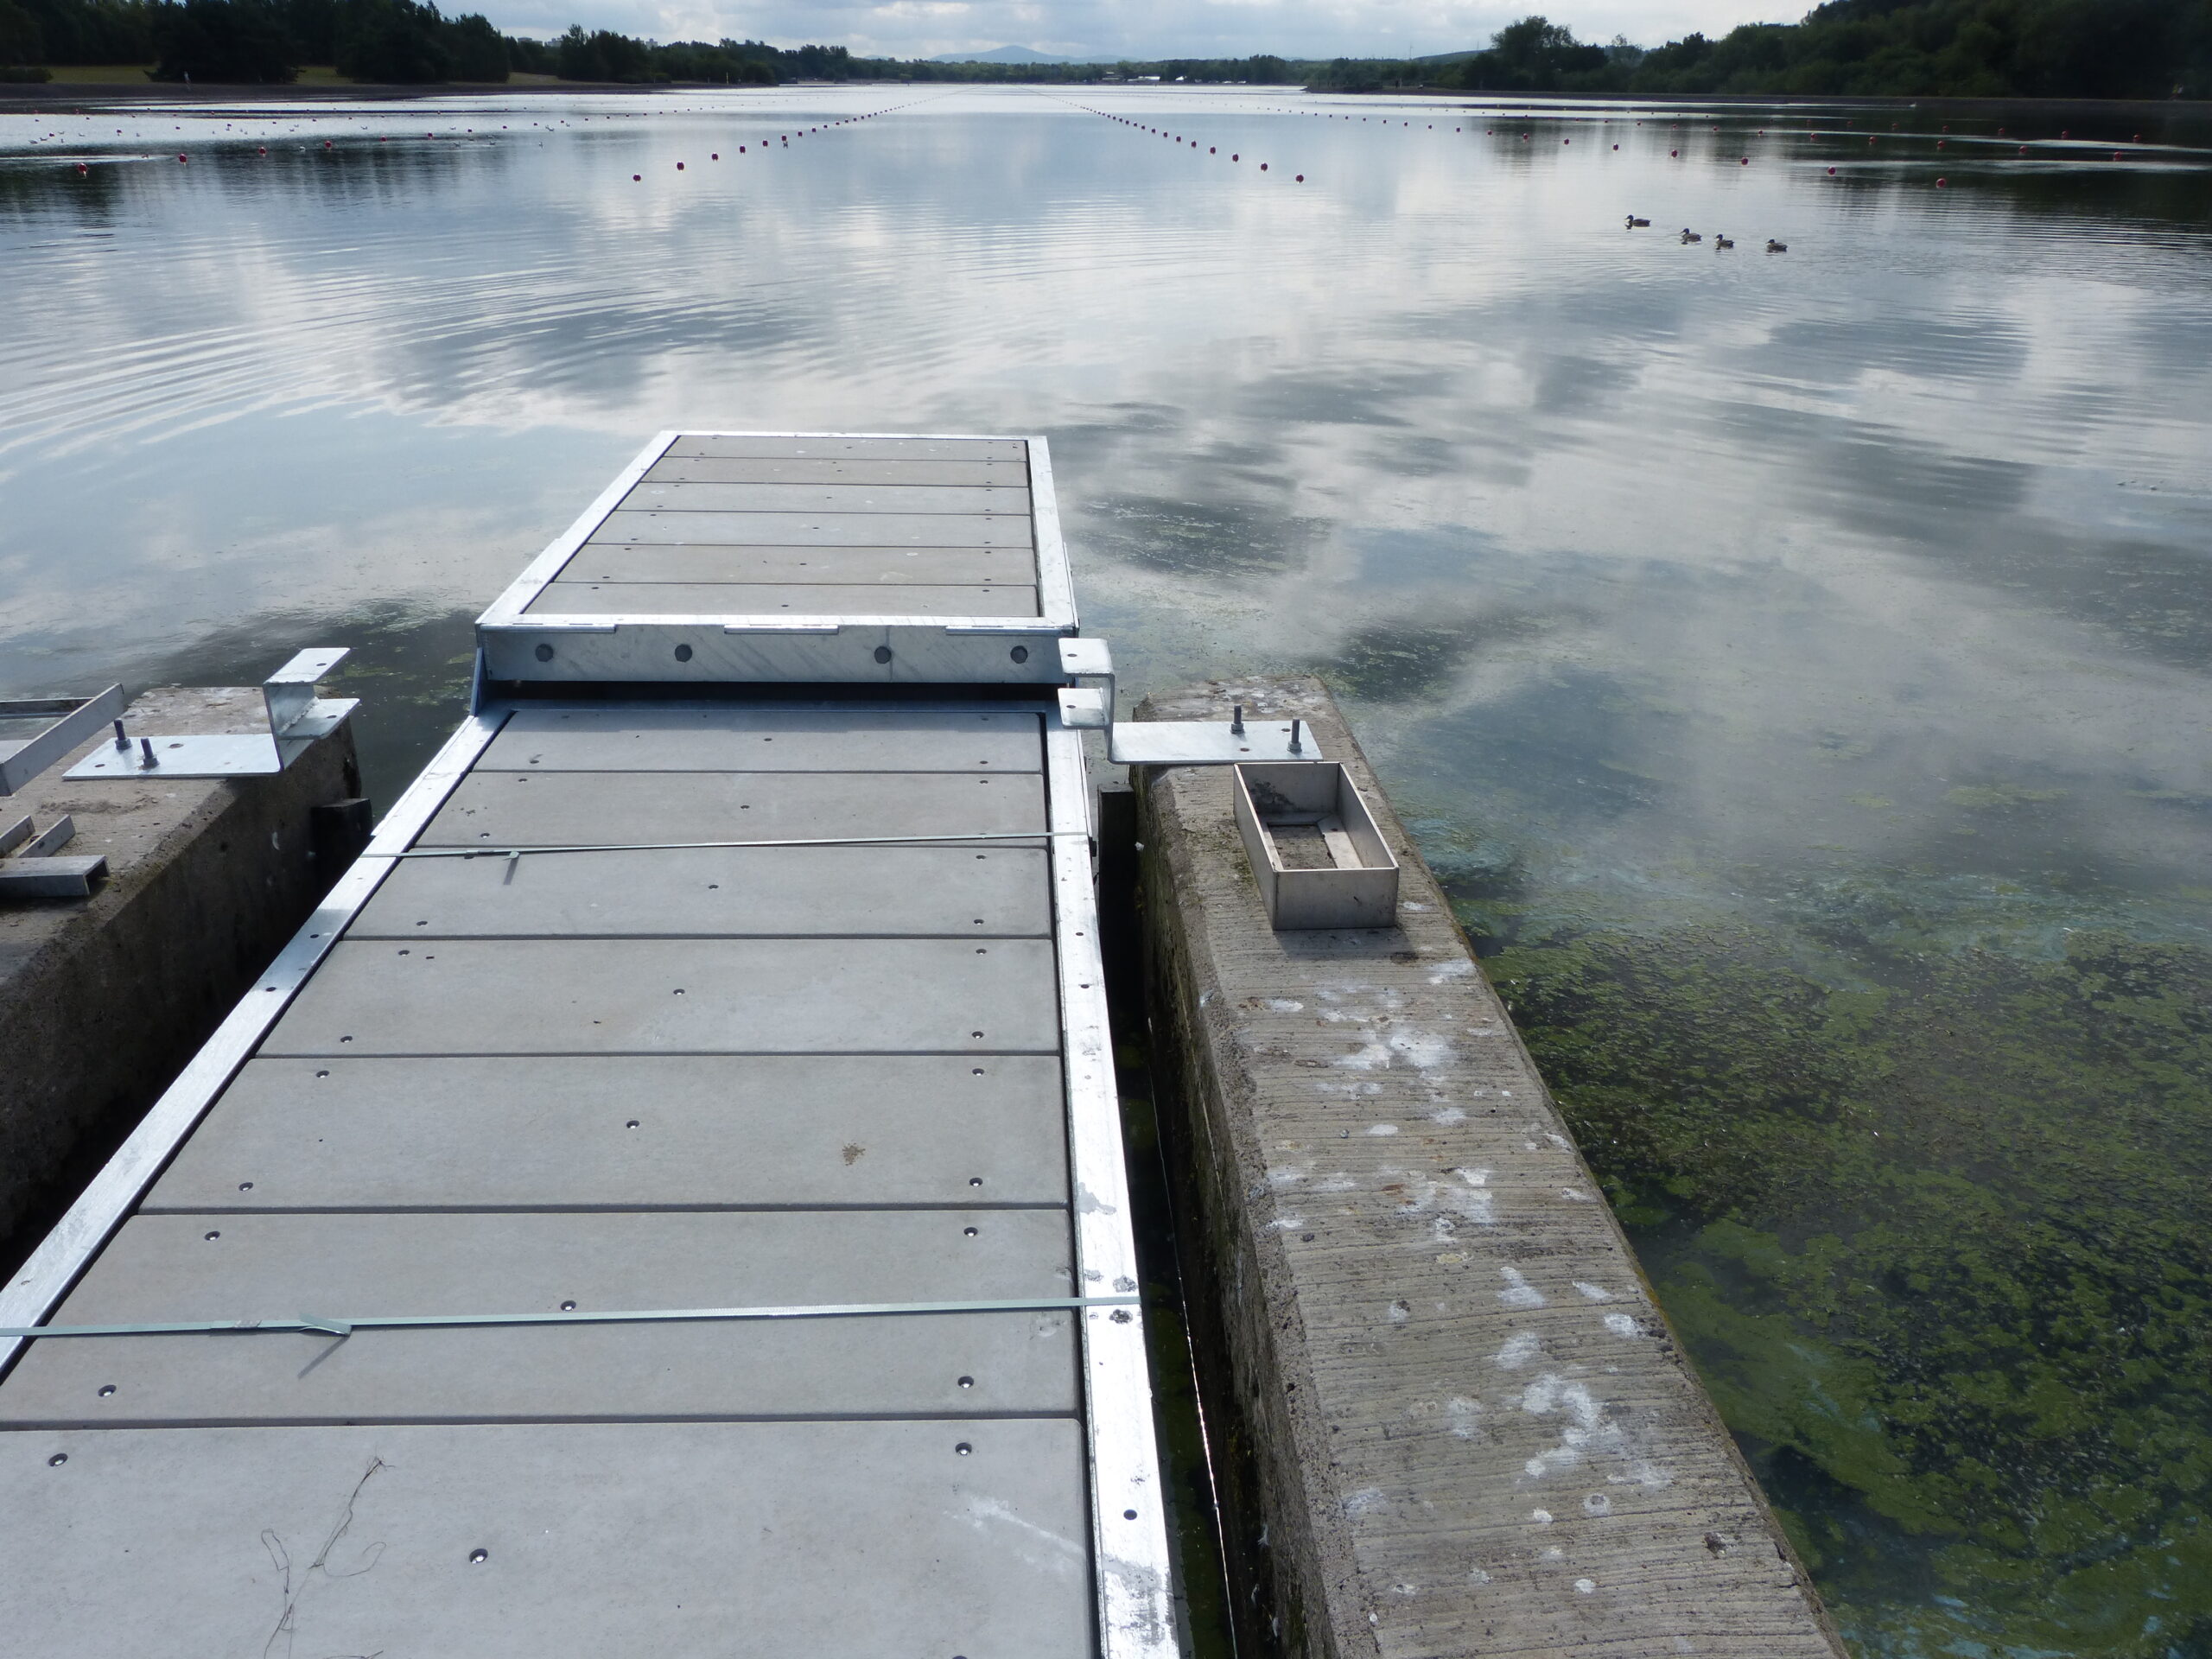 Rowing start pontoon with grey GRP decking on a calm body of water